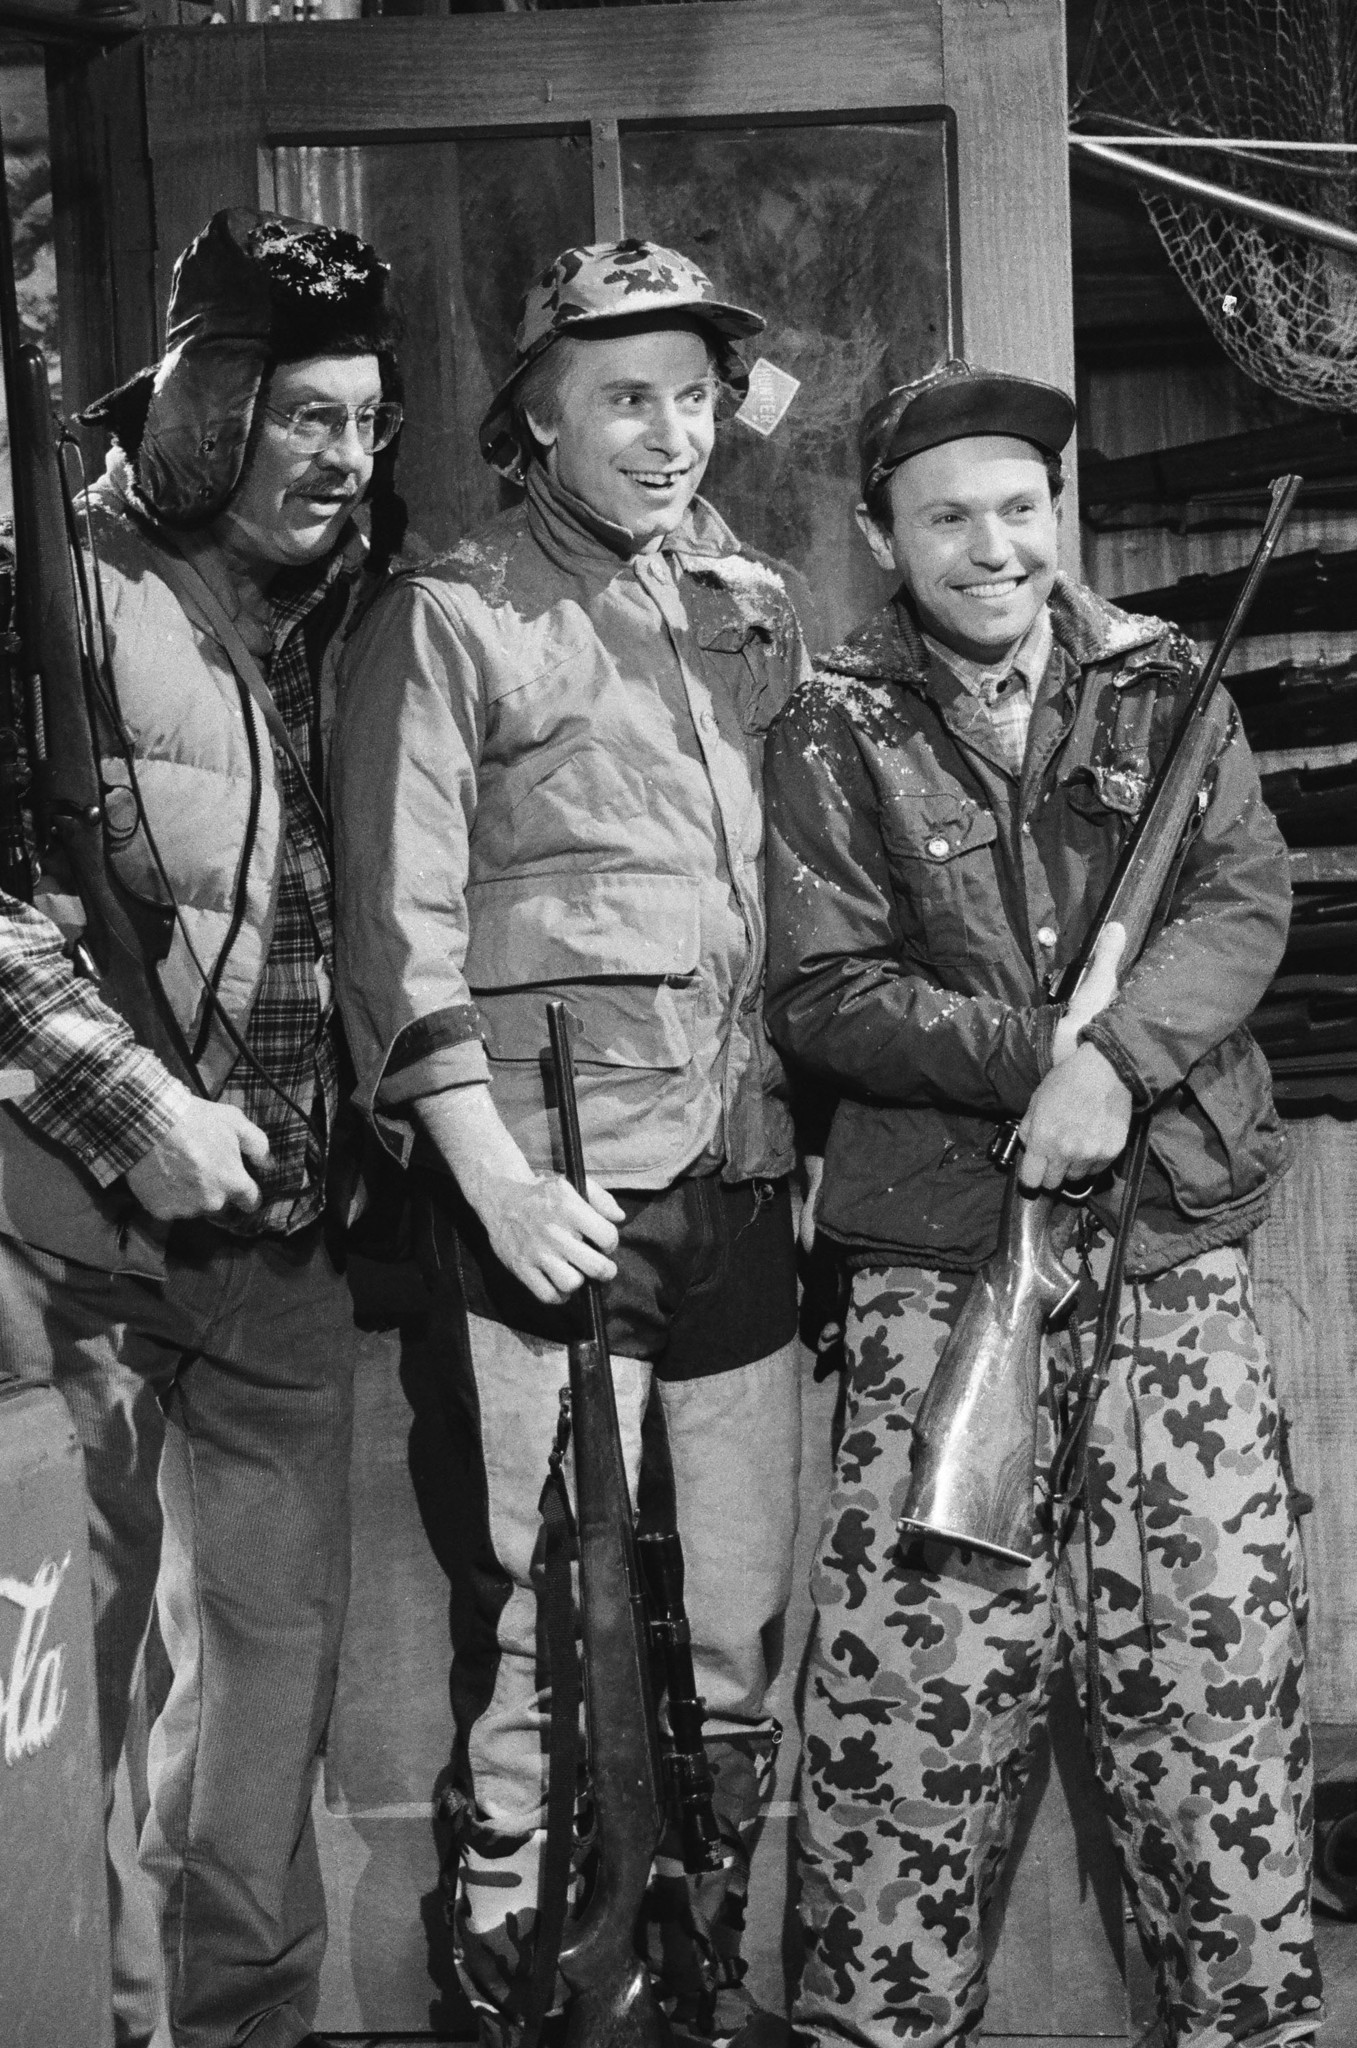 Billy Crystal, Christopher Guest and Alex Karras at event of Saturday Night Live (1975)